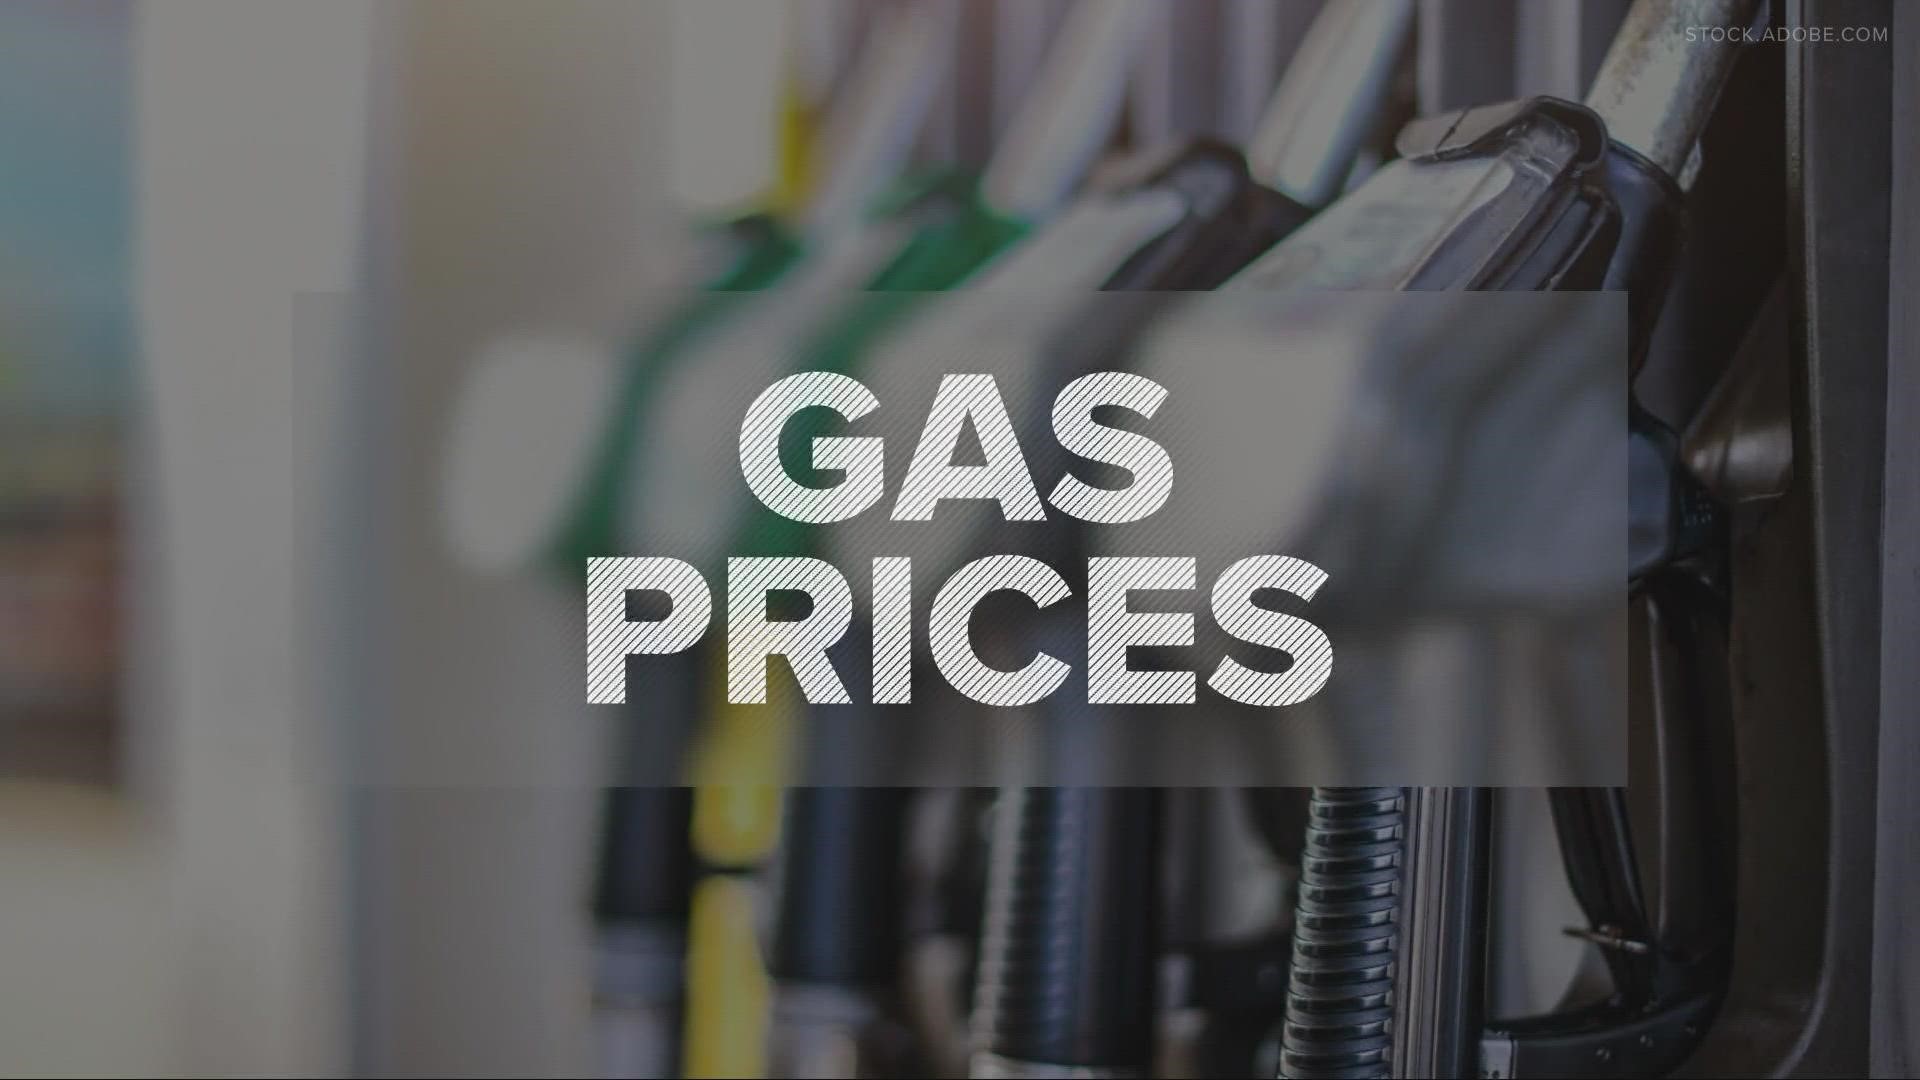 One resident we spoke with said the high gas prices made him go out to buy a hybrid car, while others are looking for more practical ways to save at the pump.